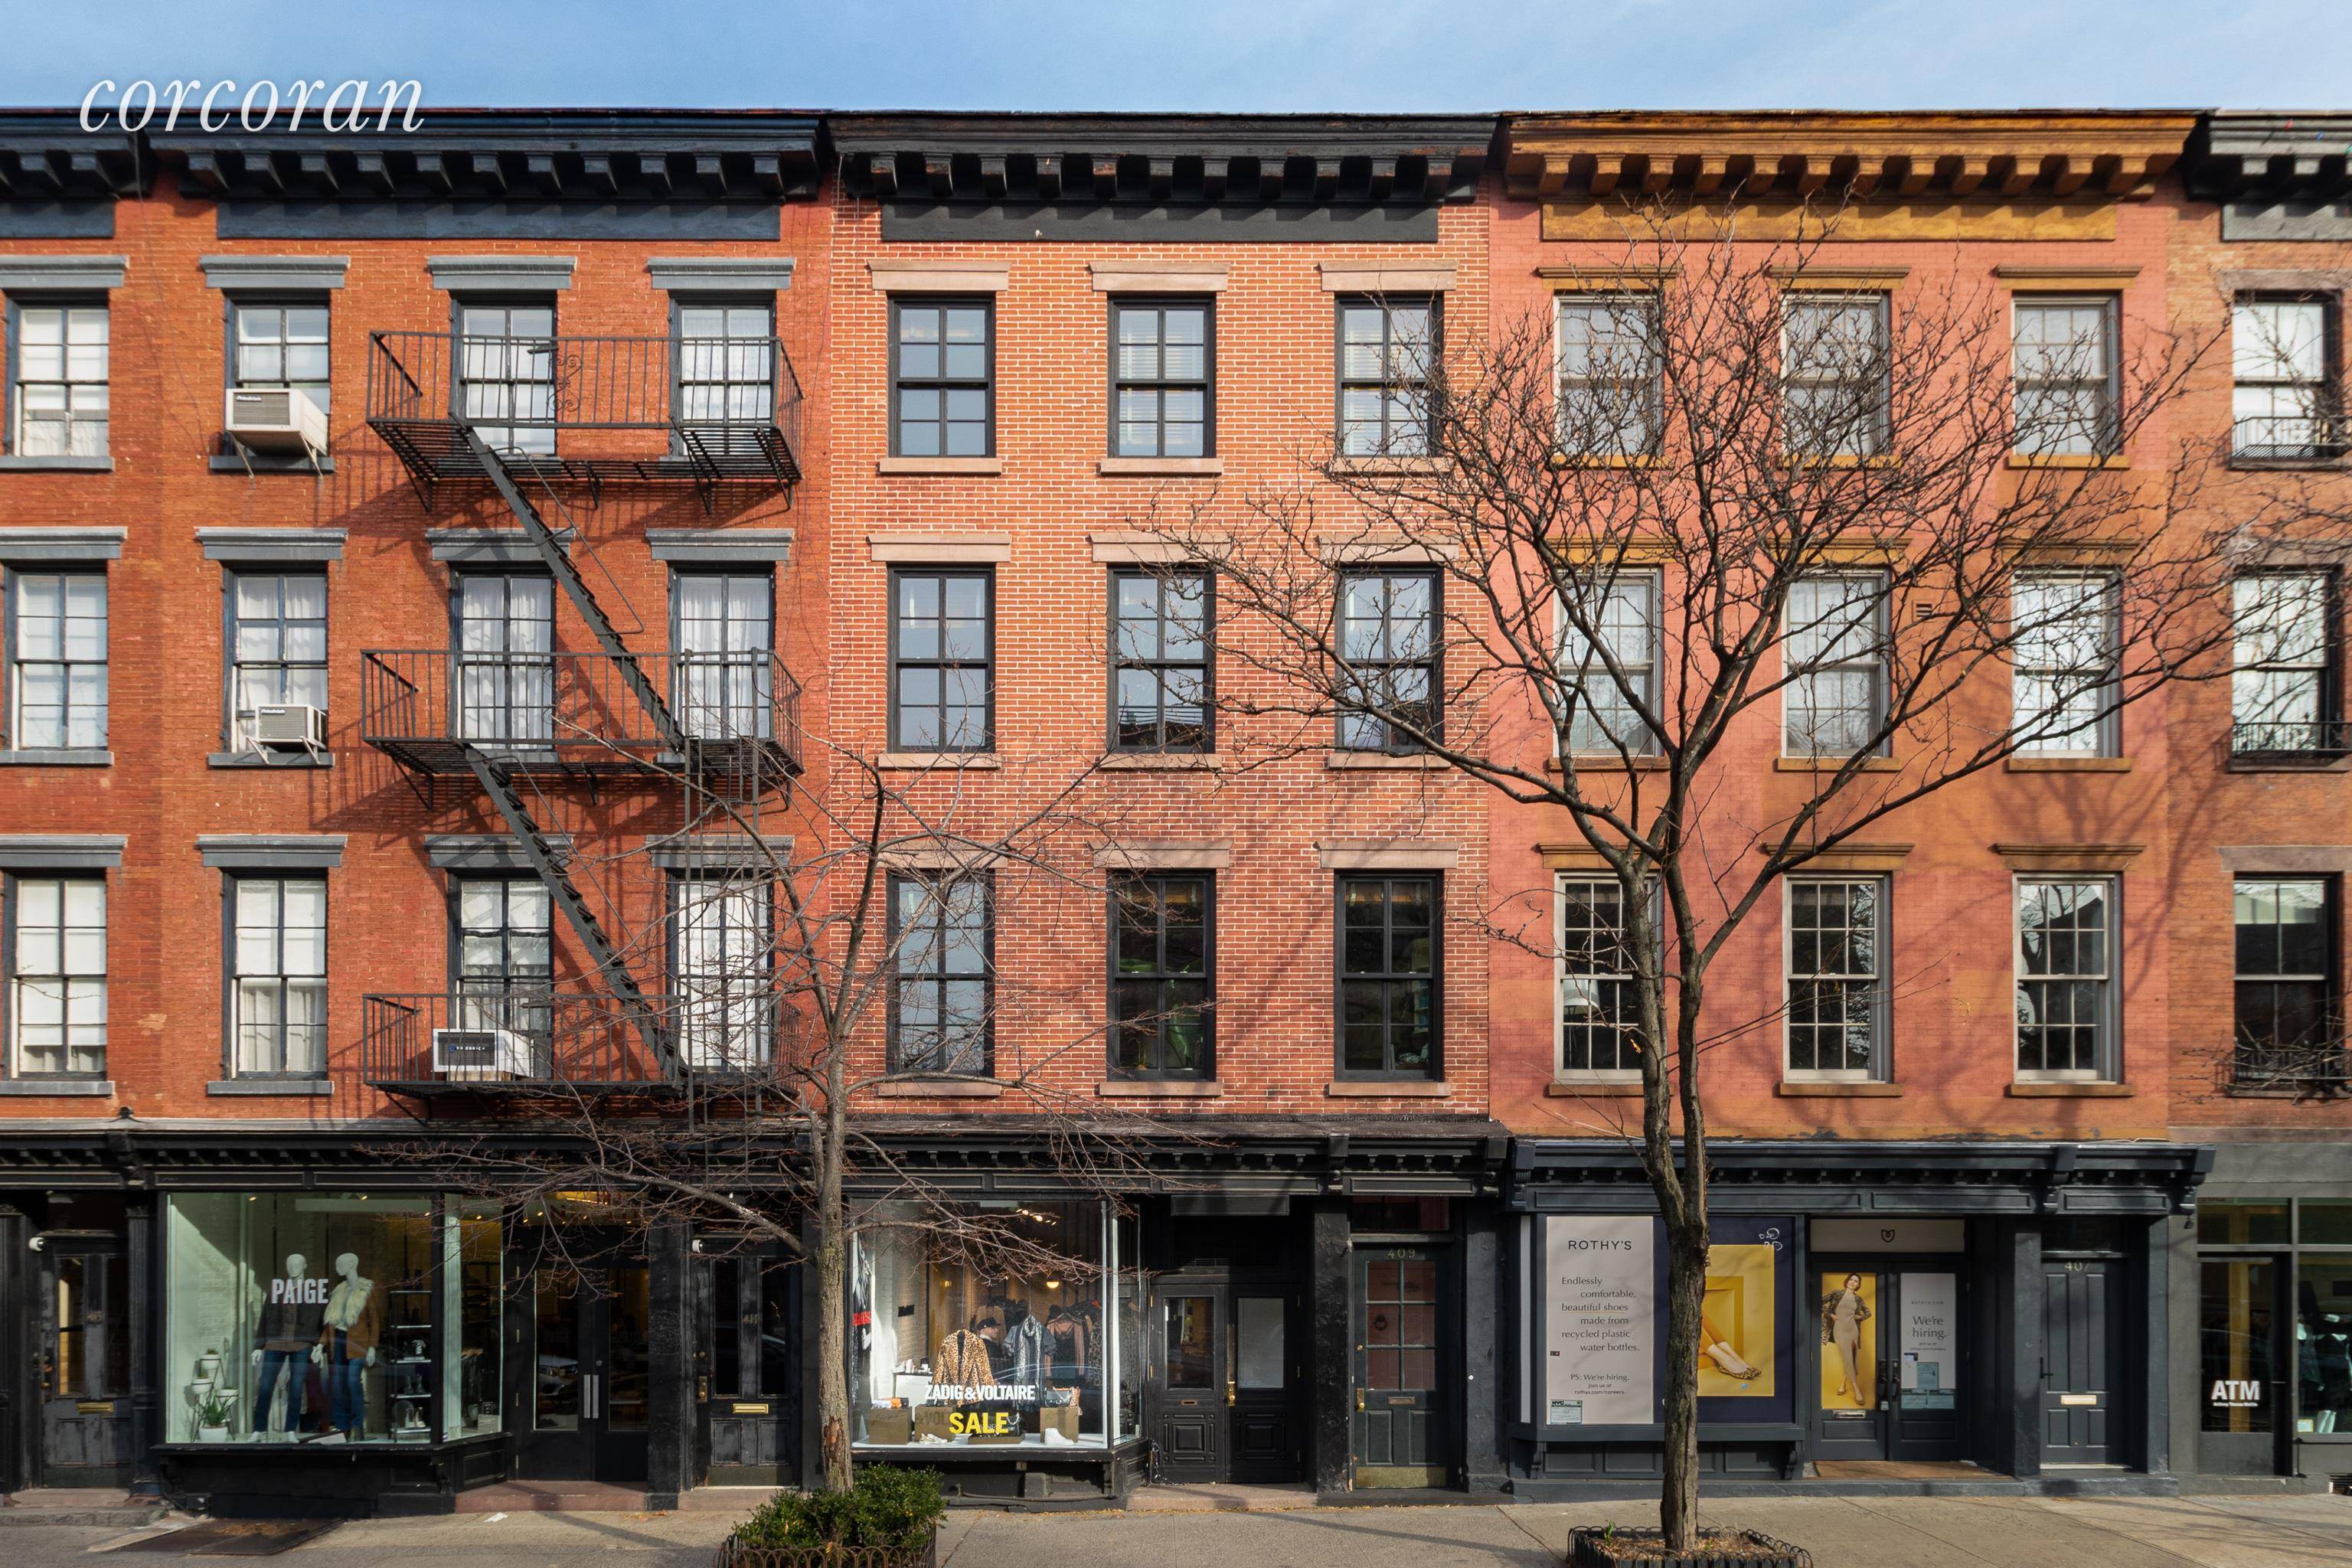 Prime Bleecker Street Single Family Townhouse with Old World Charm and Retail Income.